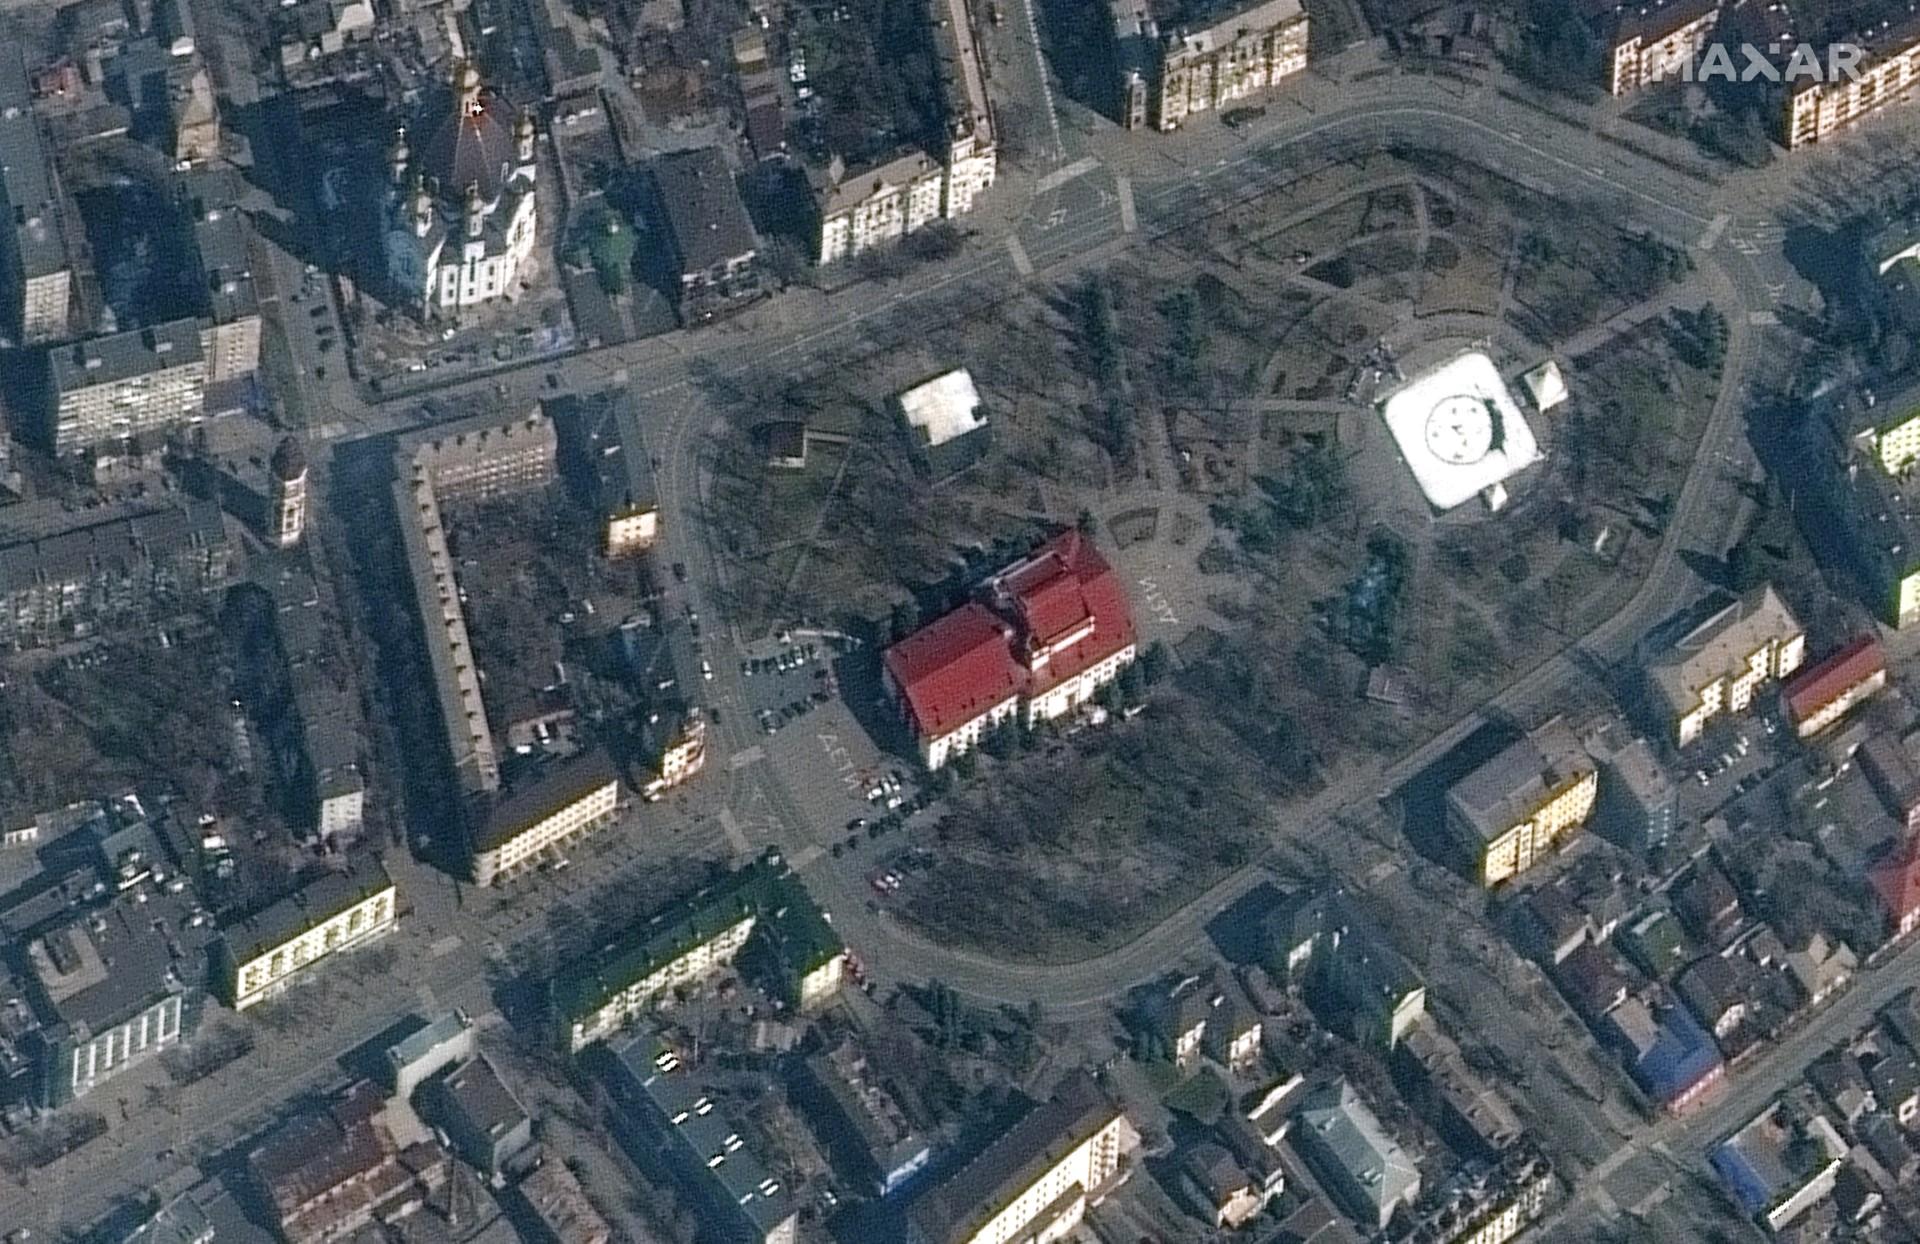 This Maxar satellite image released on March 16, shows the Mariupol Drama Theater in Mariupol, Ukraine, on March 14. Photo: AFP